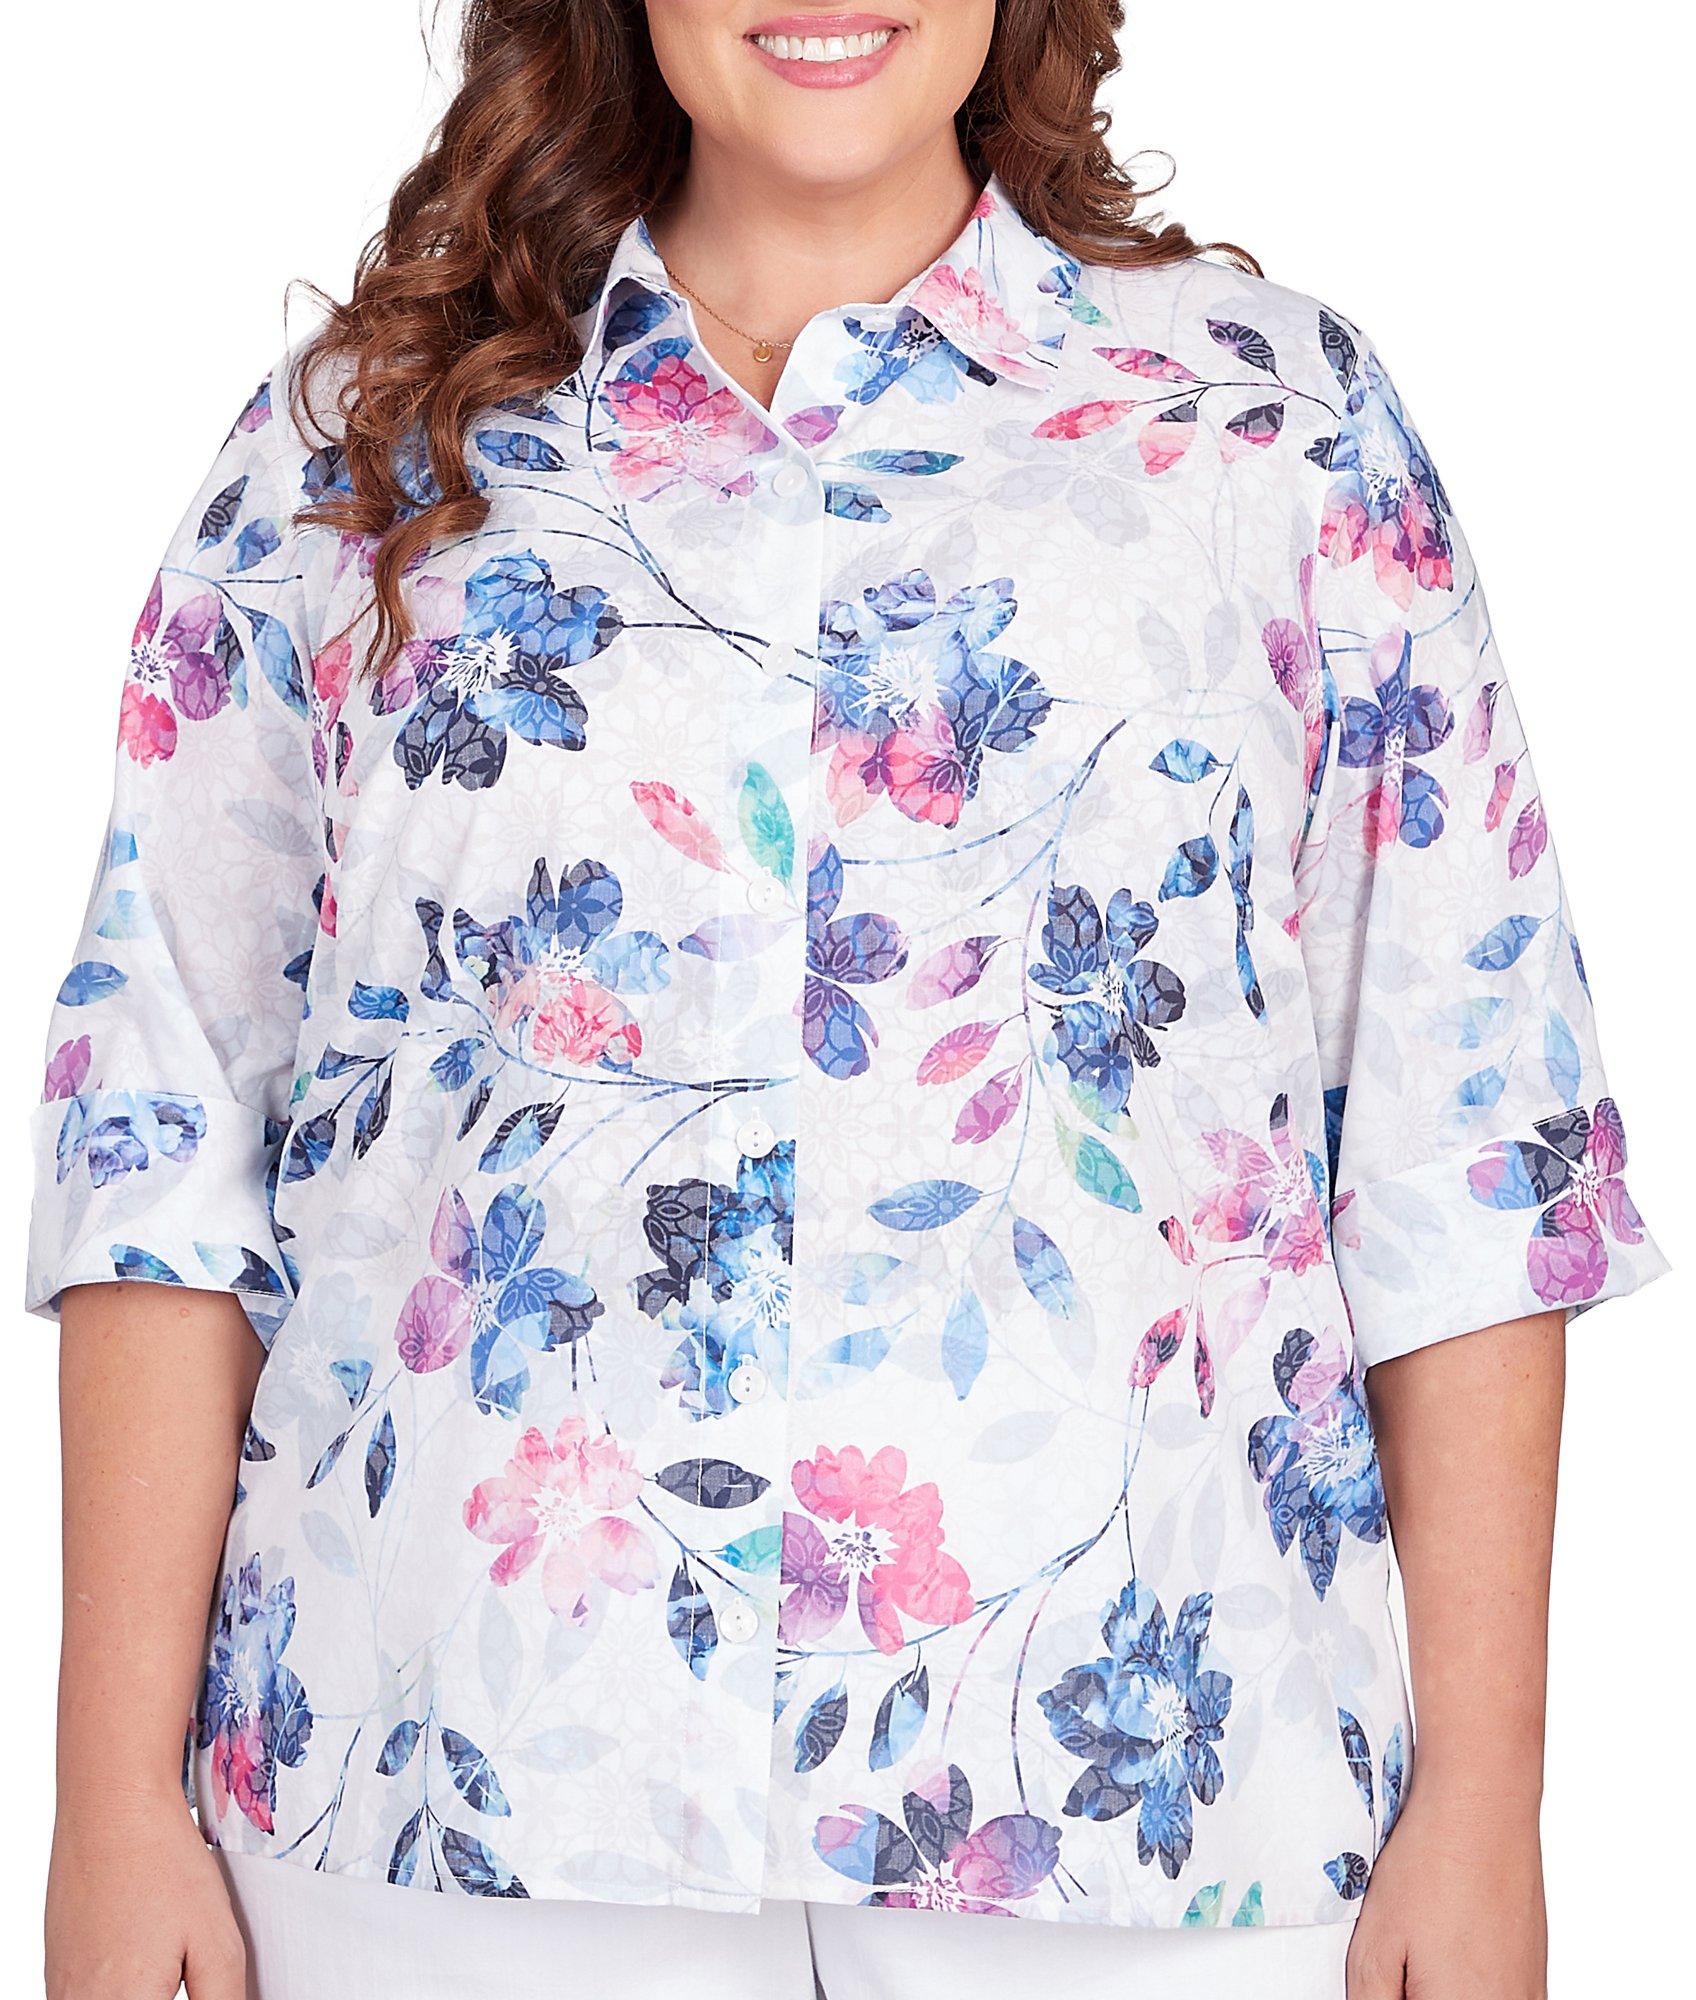 Plus Floral Button Down 3/4 Sleeve Top